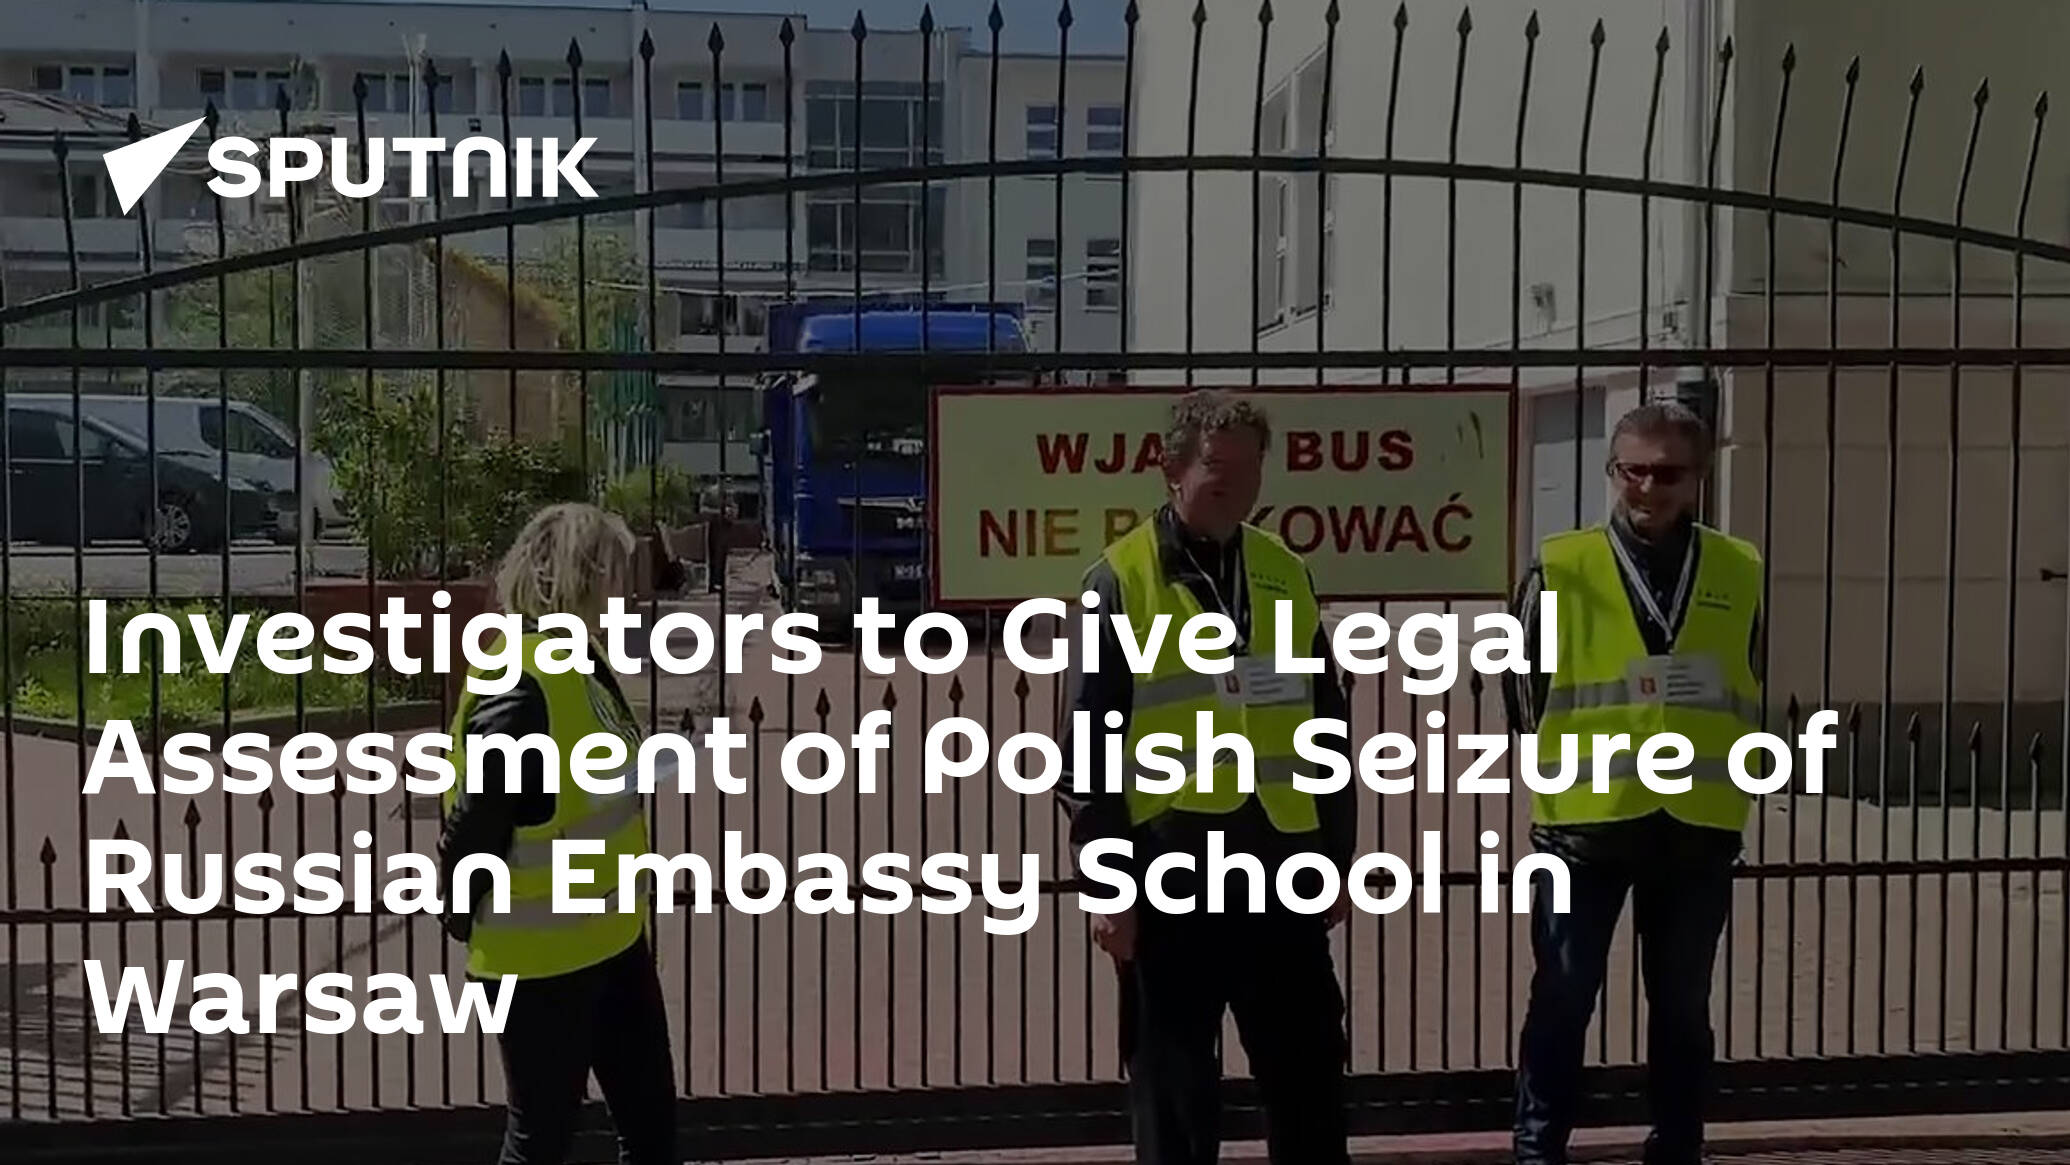 Investigators to Give Legal Assessment of Polish Seizure of Russian Embassy School in Warsaw